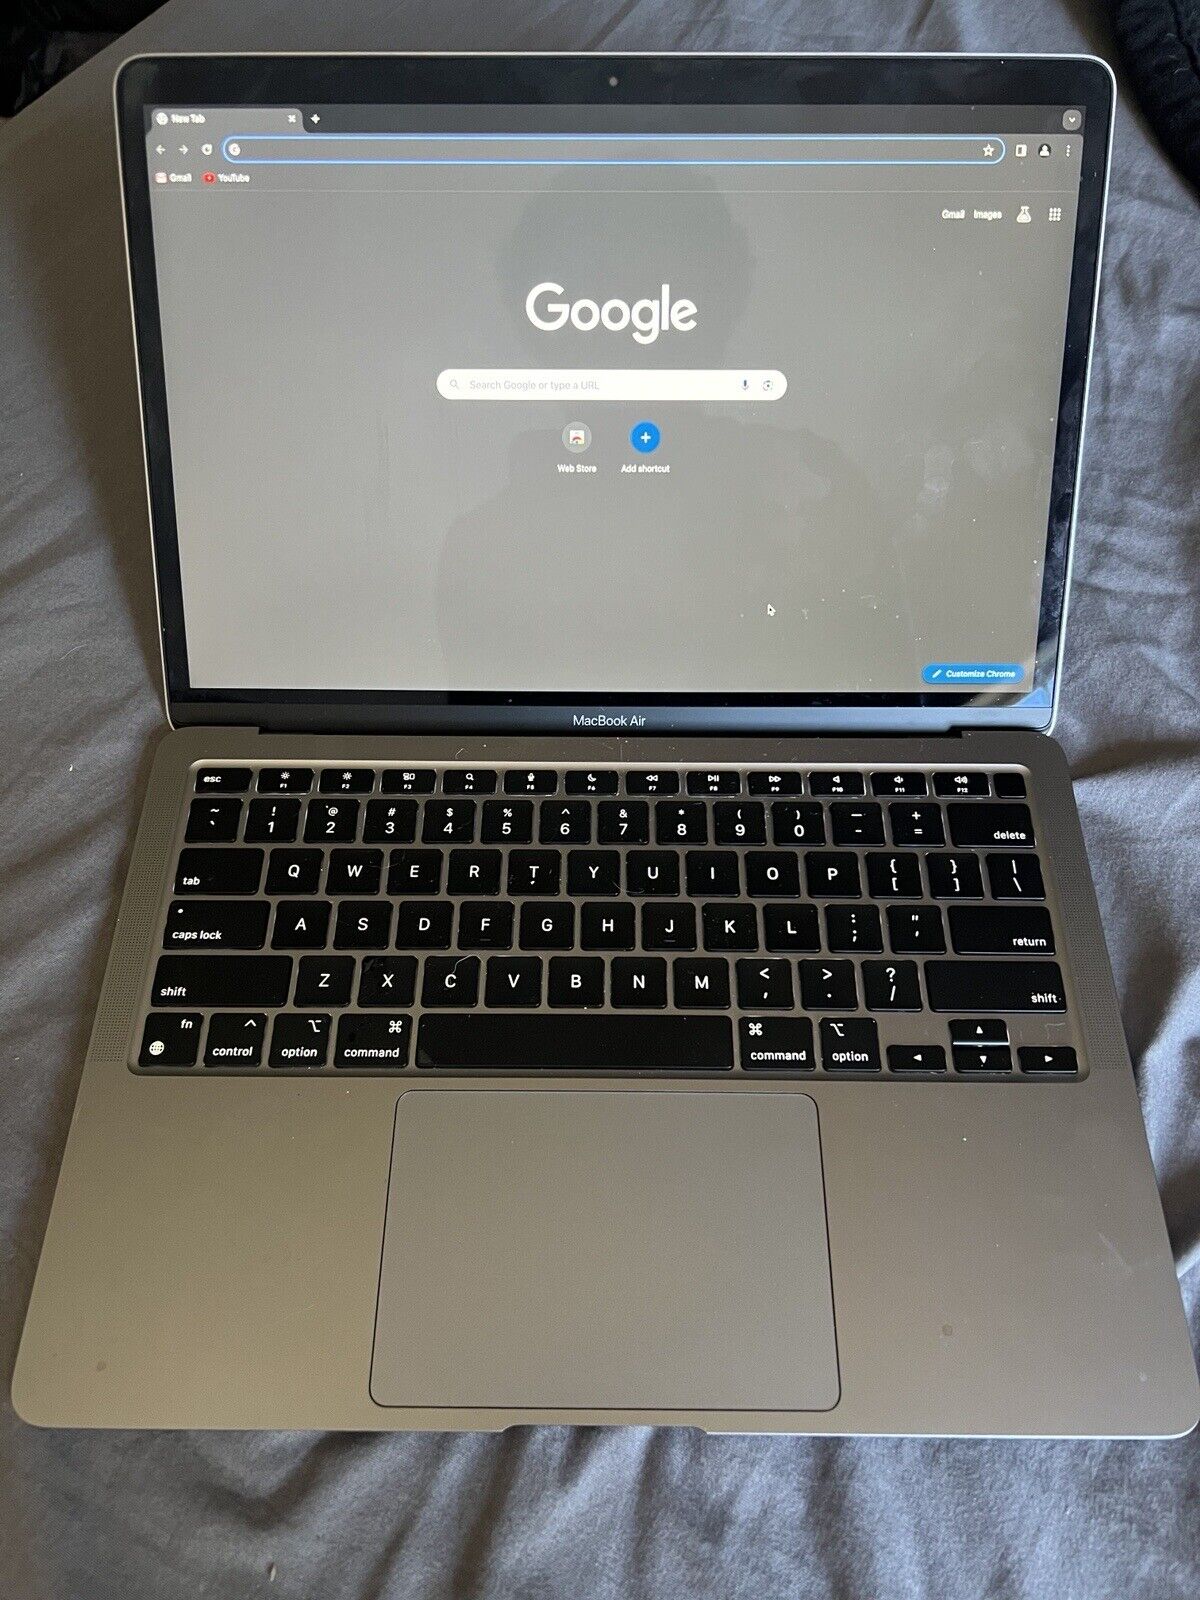 Apple MacBook Air 13in (256GB SSD, M1, 8GB) Laptop - Space Gray - MGN63LL/A...